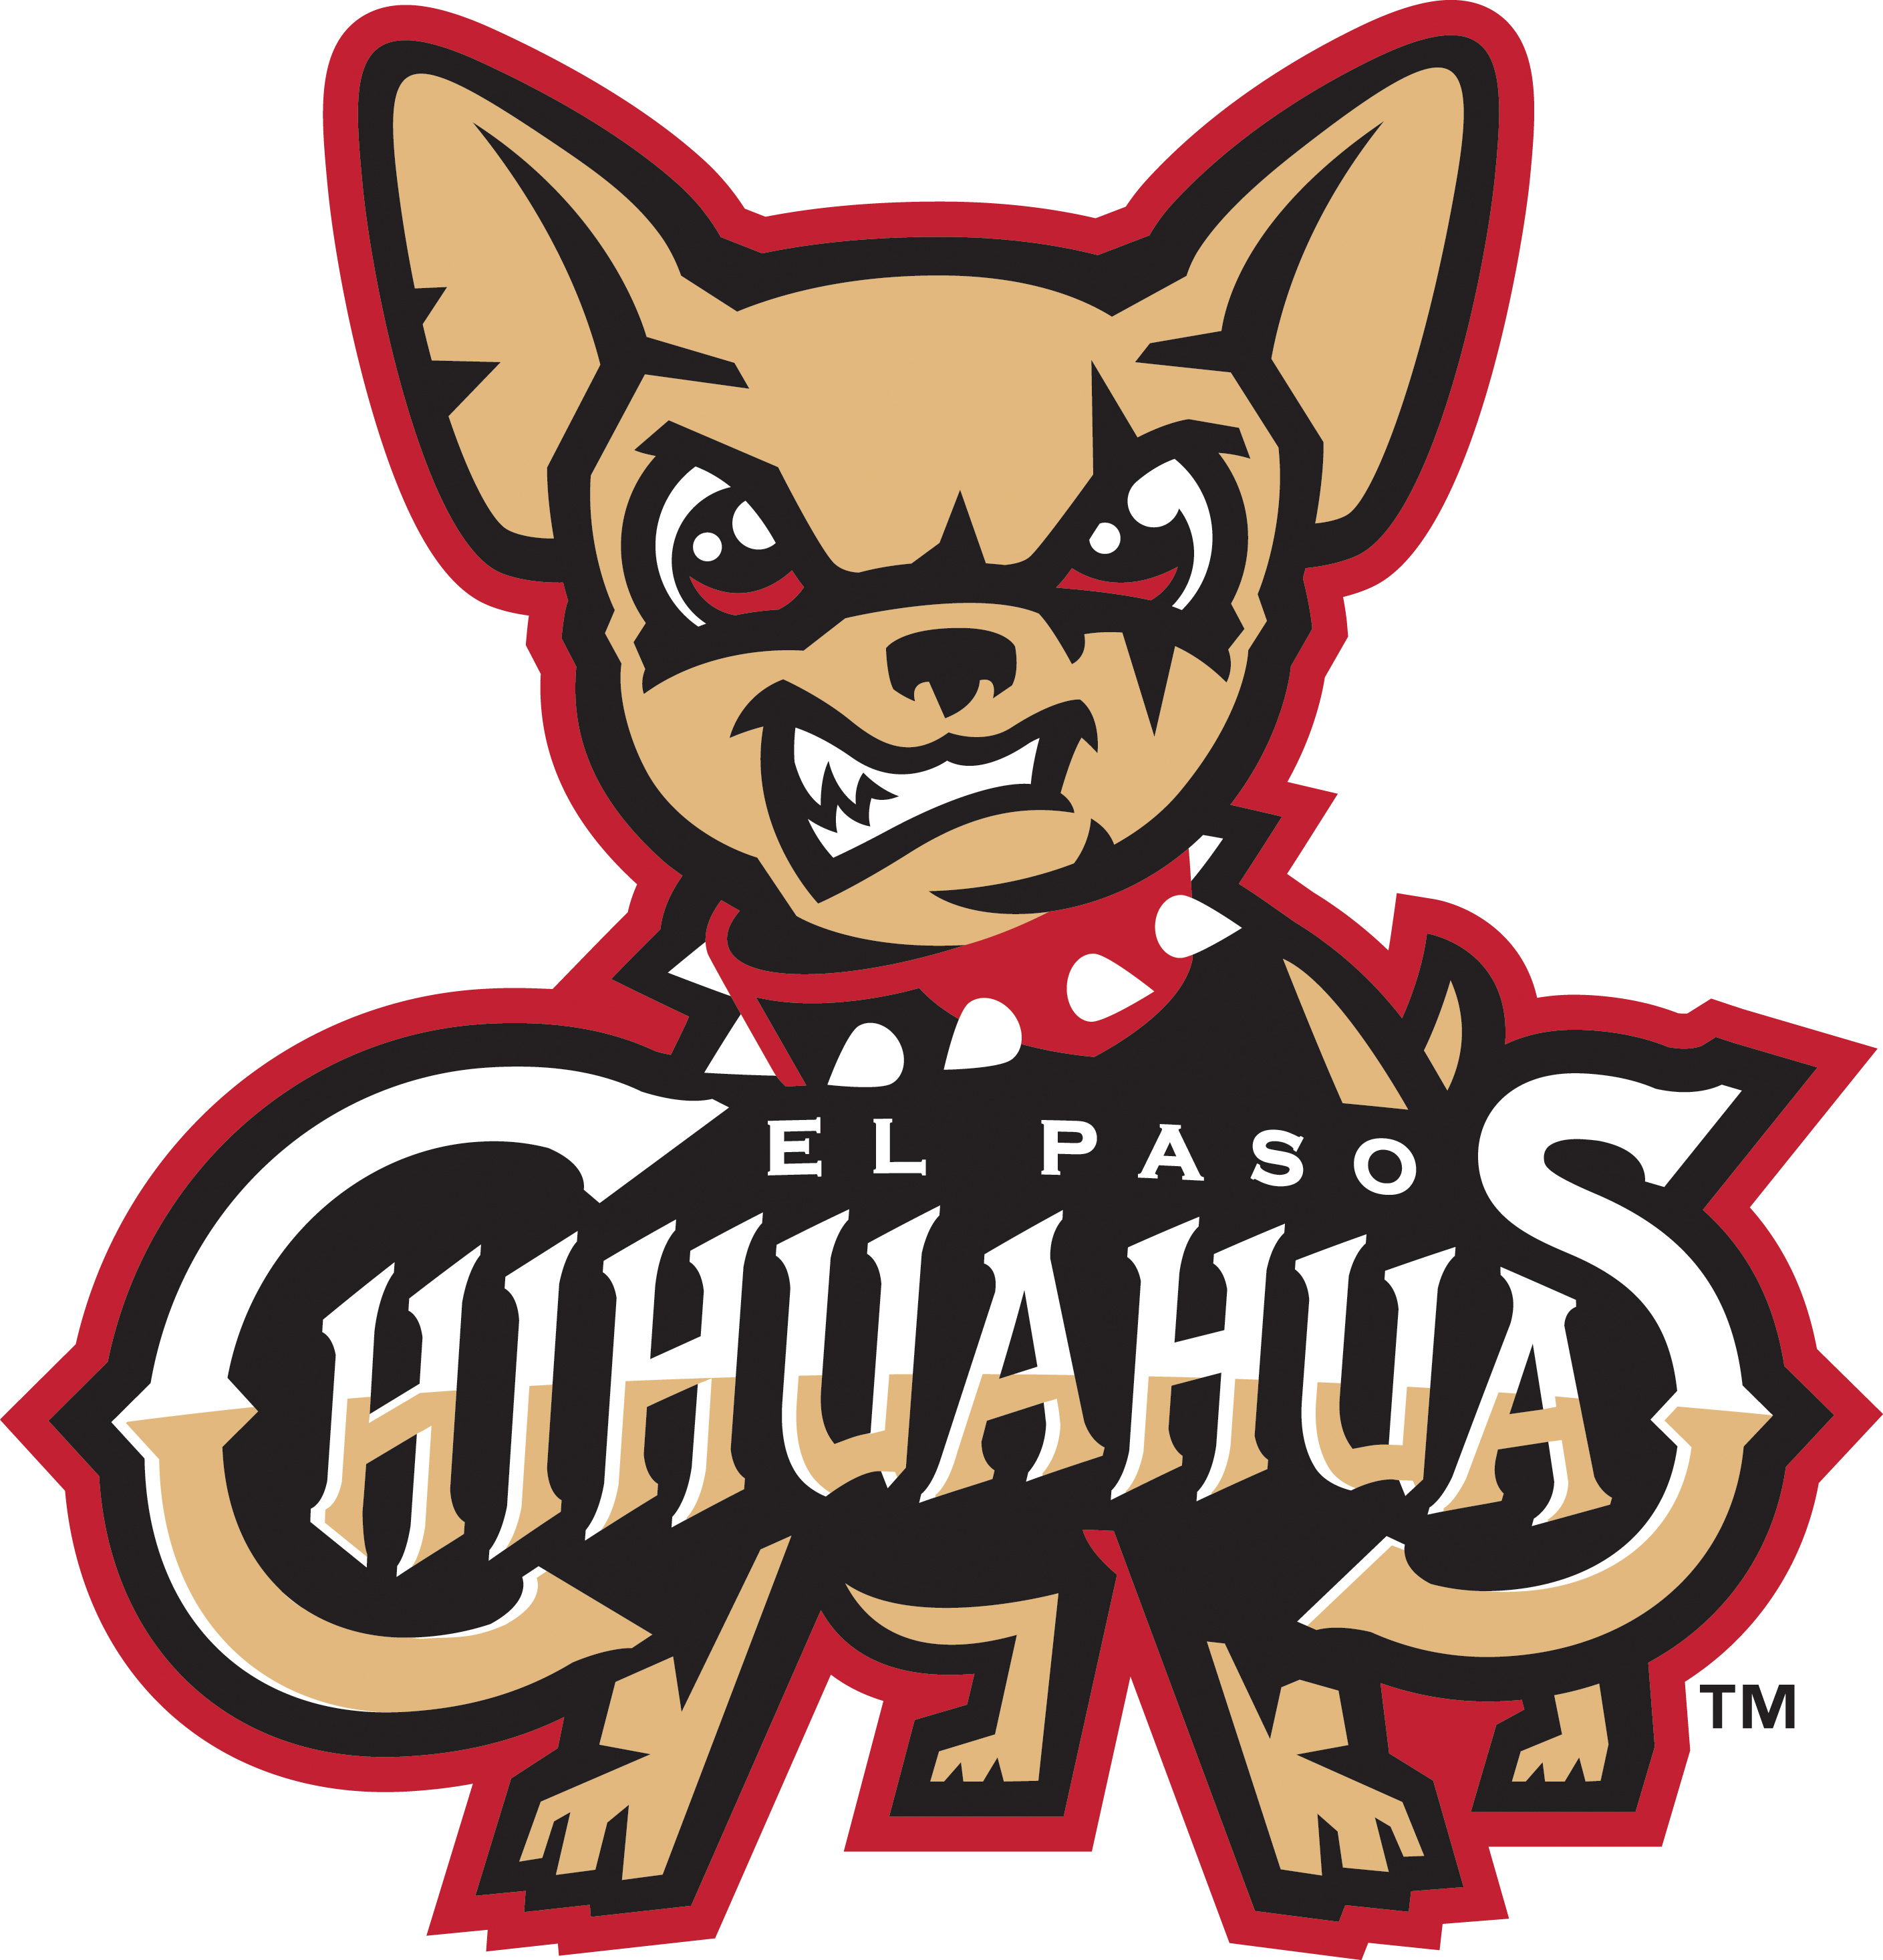 2016 Chihuahuas Downloadable Schedule.